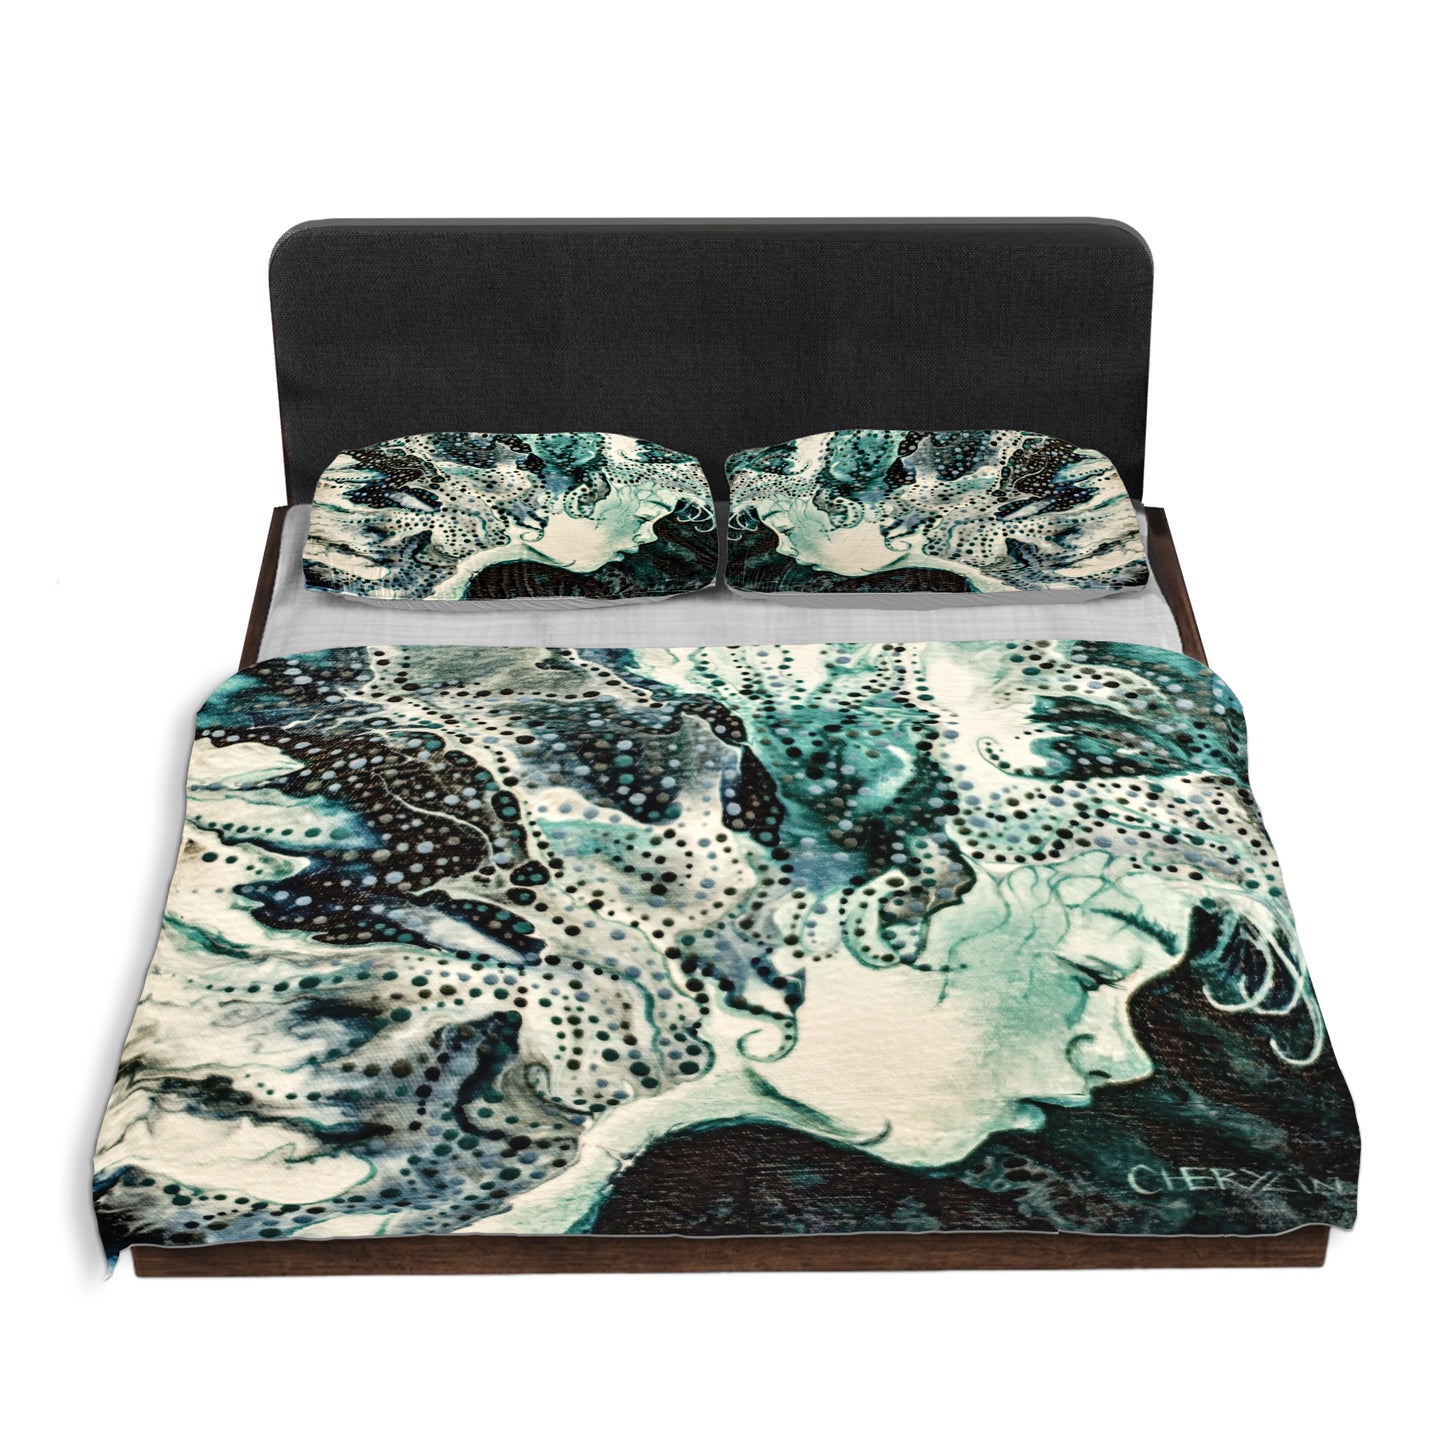 Dance With The Wave By Cherylin Louw Duvet Cover Set